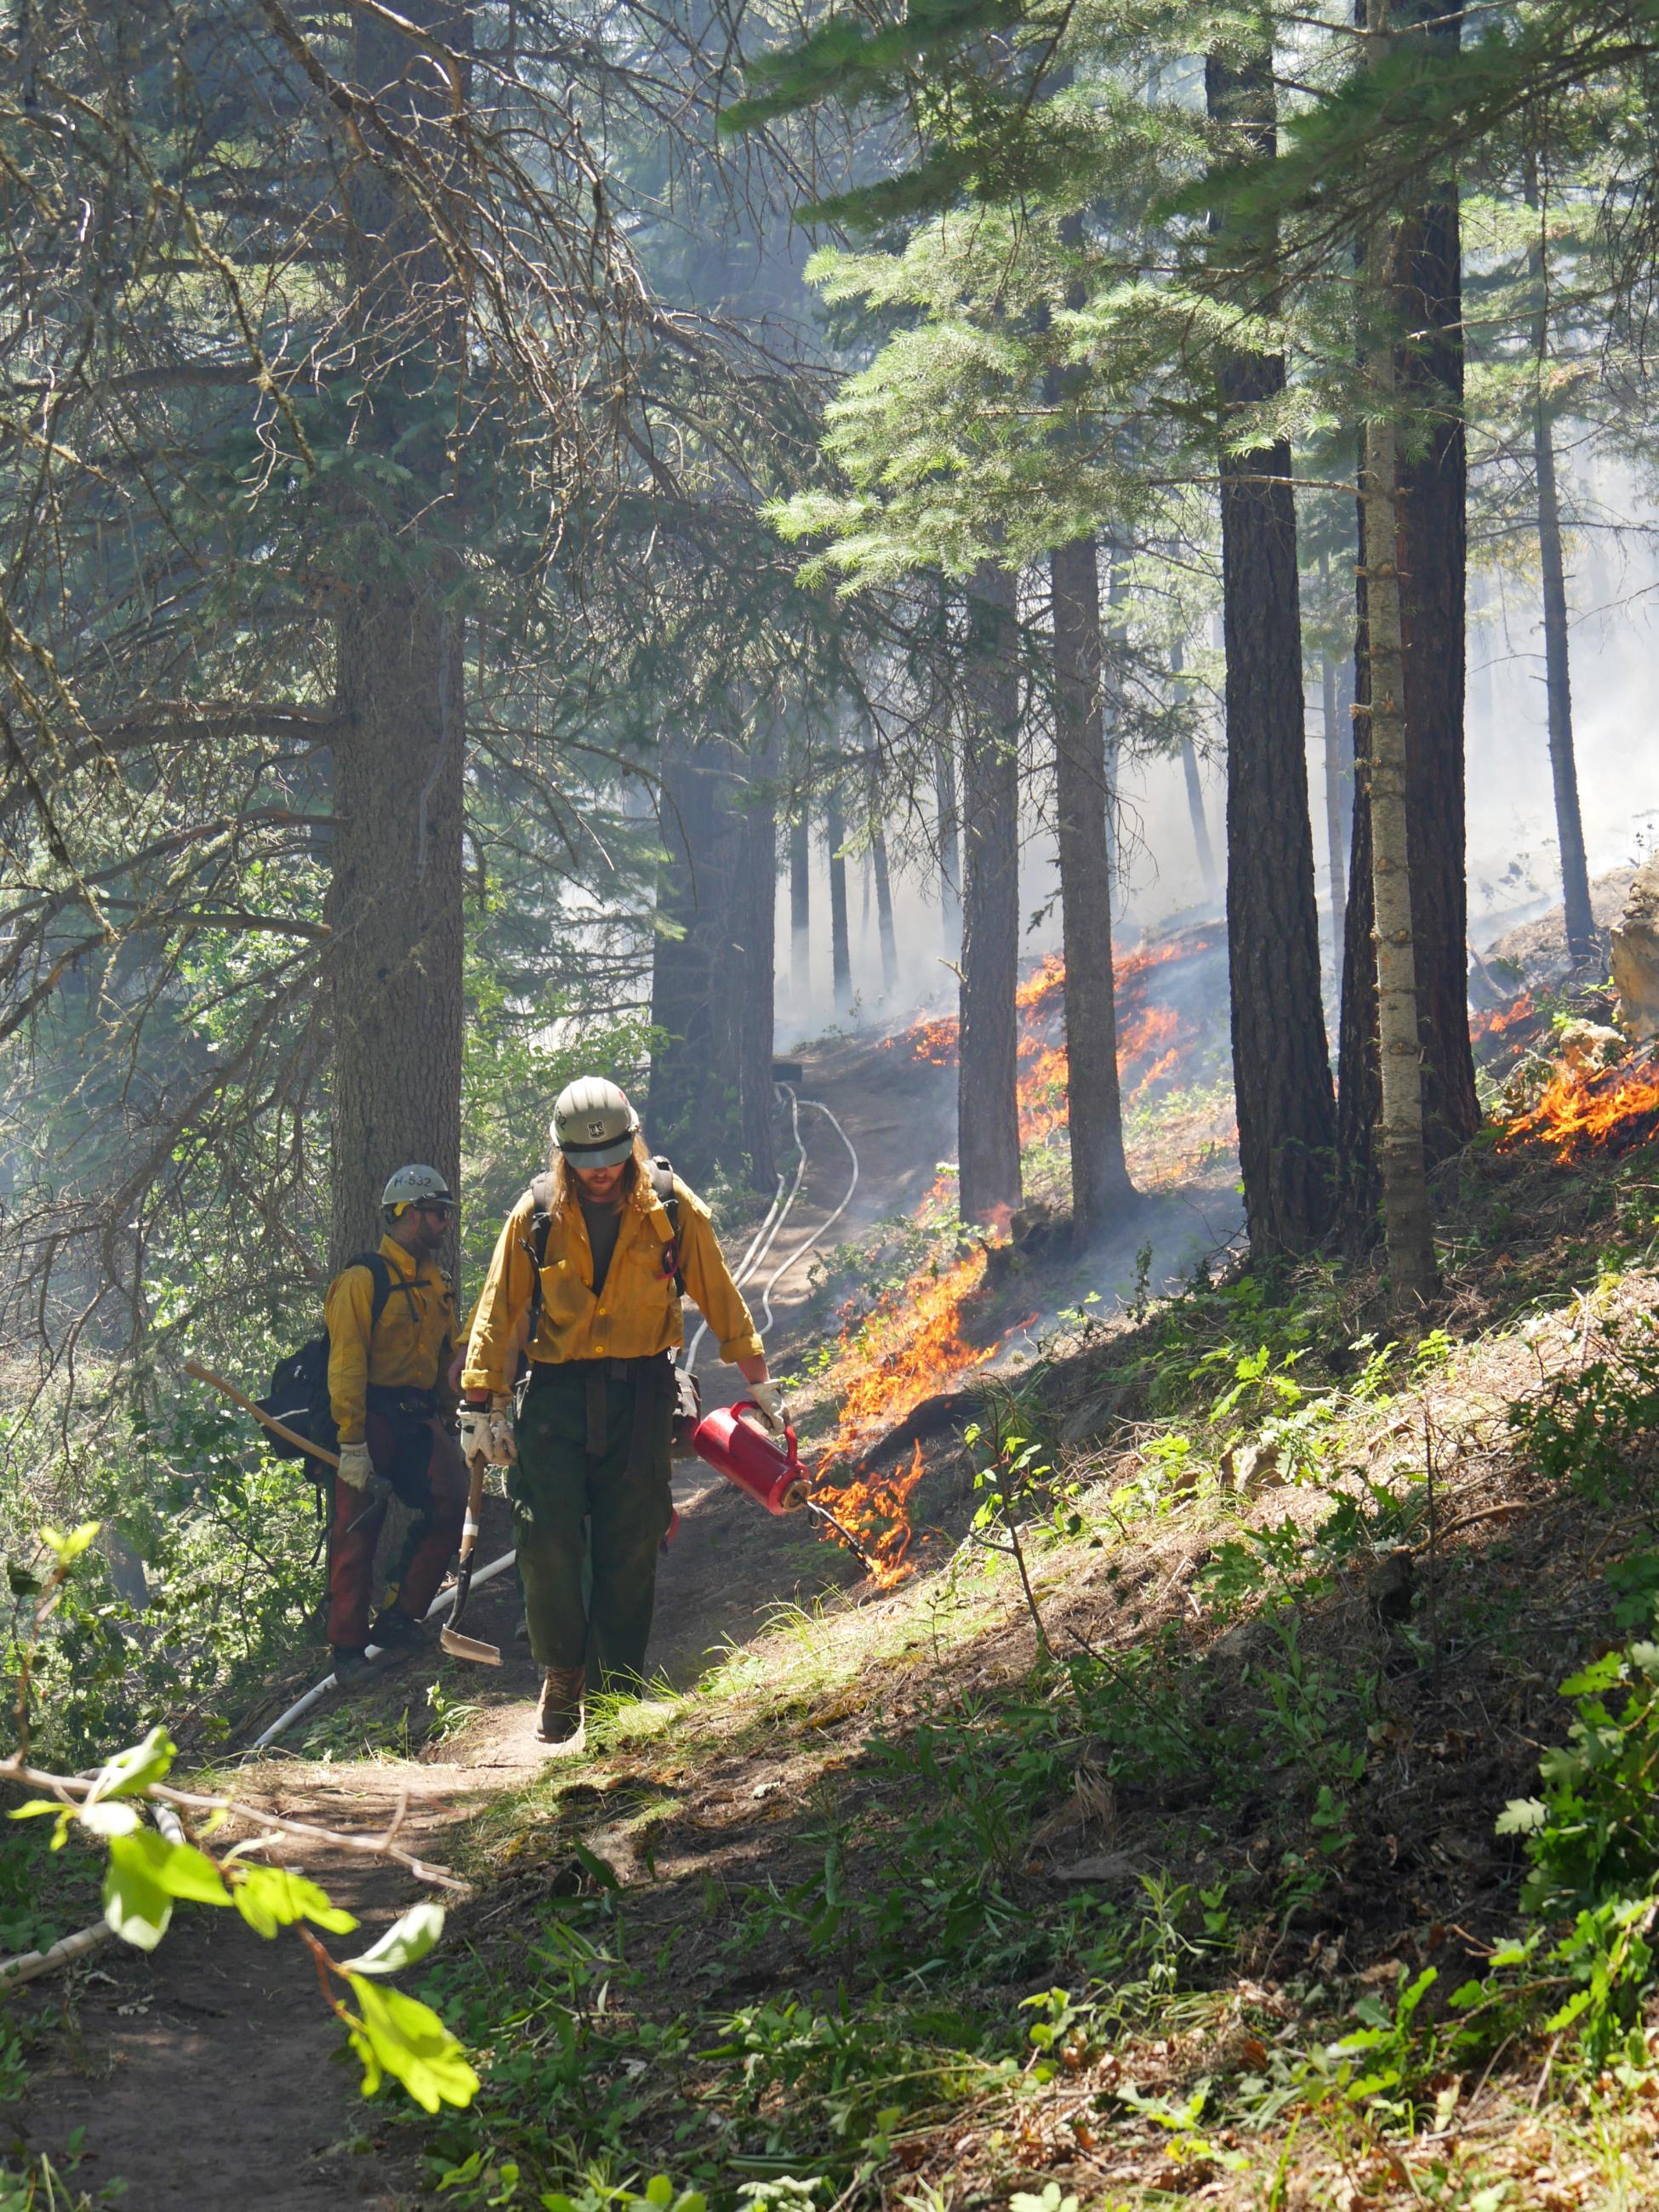 1 firefighter monitors fire behavior on a forest hillside while another walks along a previously constructed handline. The second firefighter is using a drip torch to put fire on the ground to strengthen the previously constructed handline. A white hose lay runs along the handline as a contingency if needed.